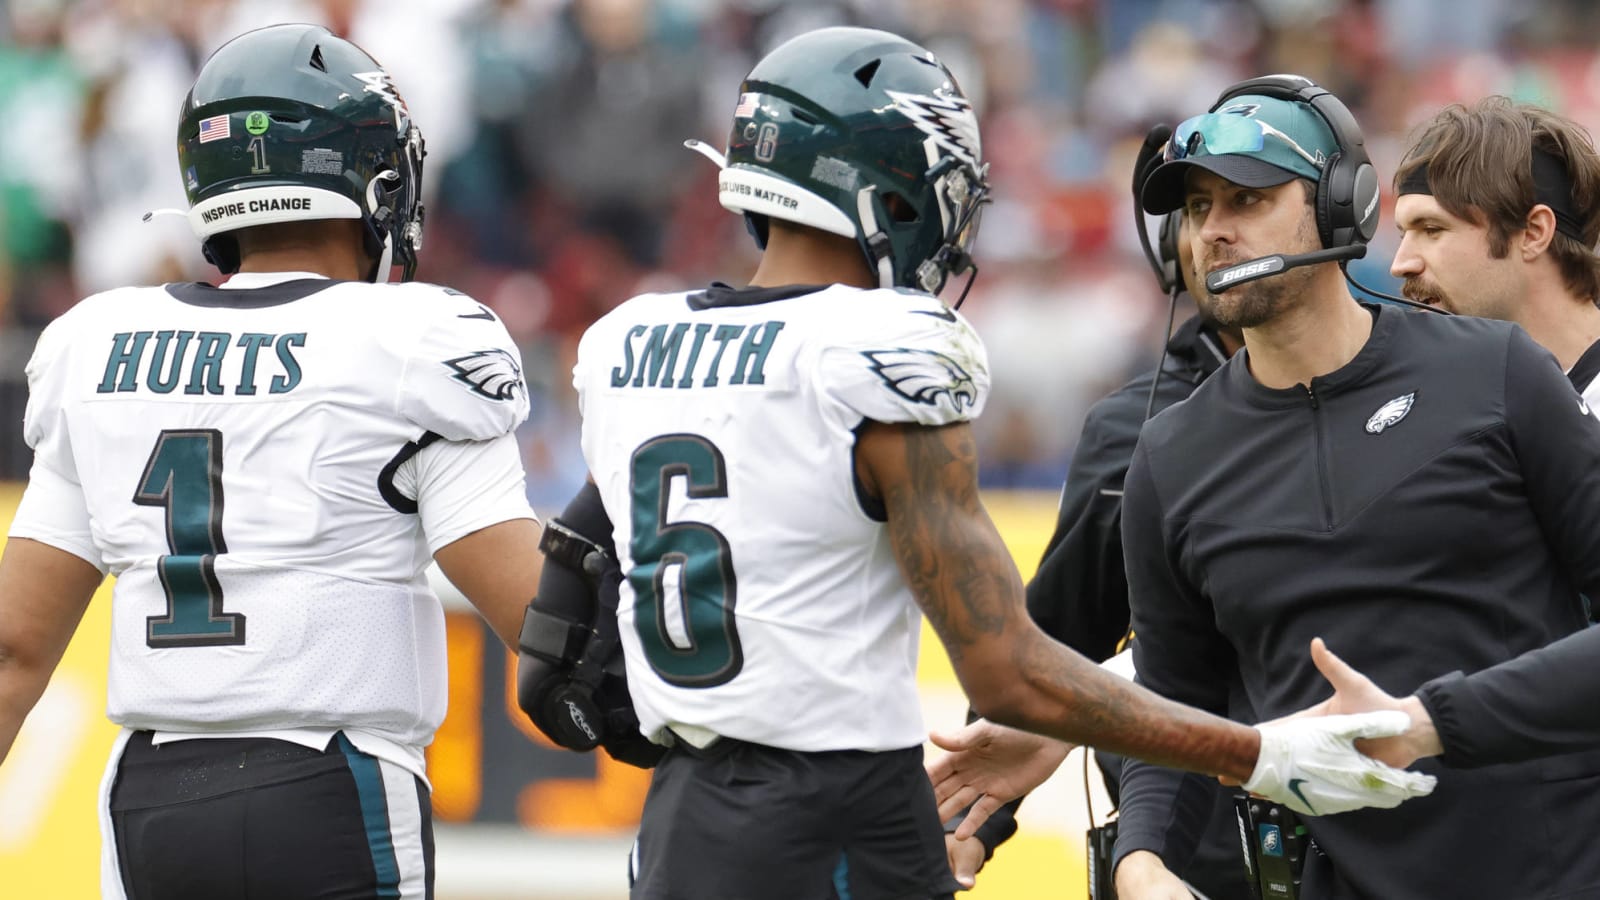 Playoff-bound Eagles may rest starters vs. Cowboys